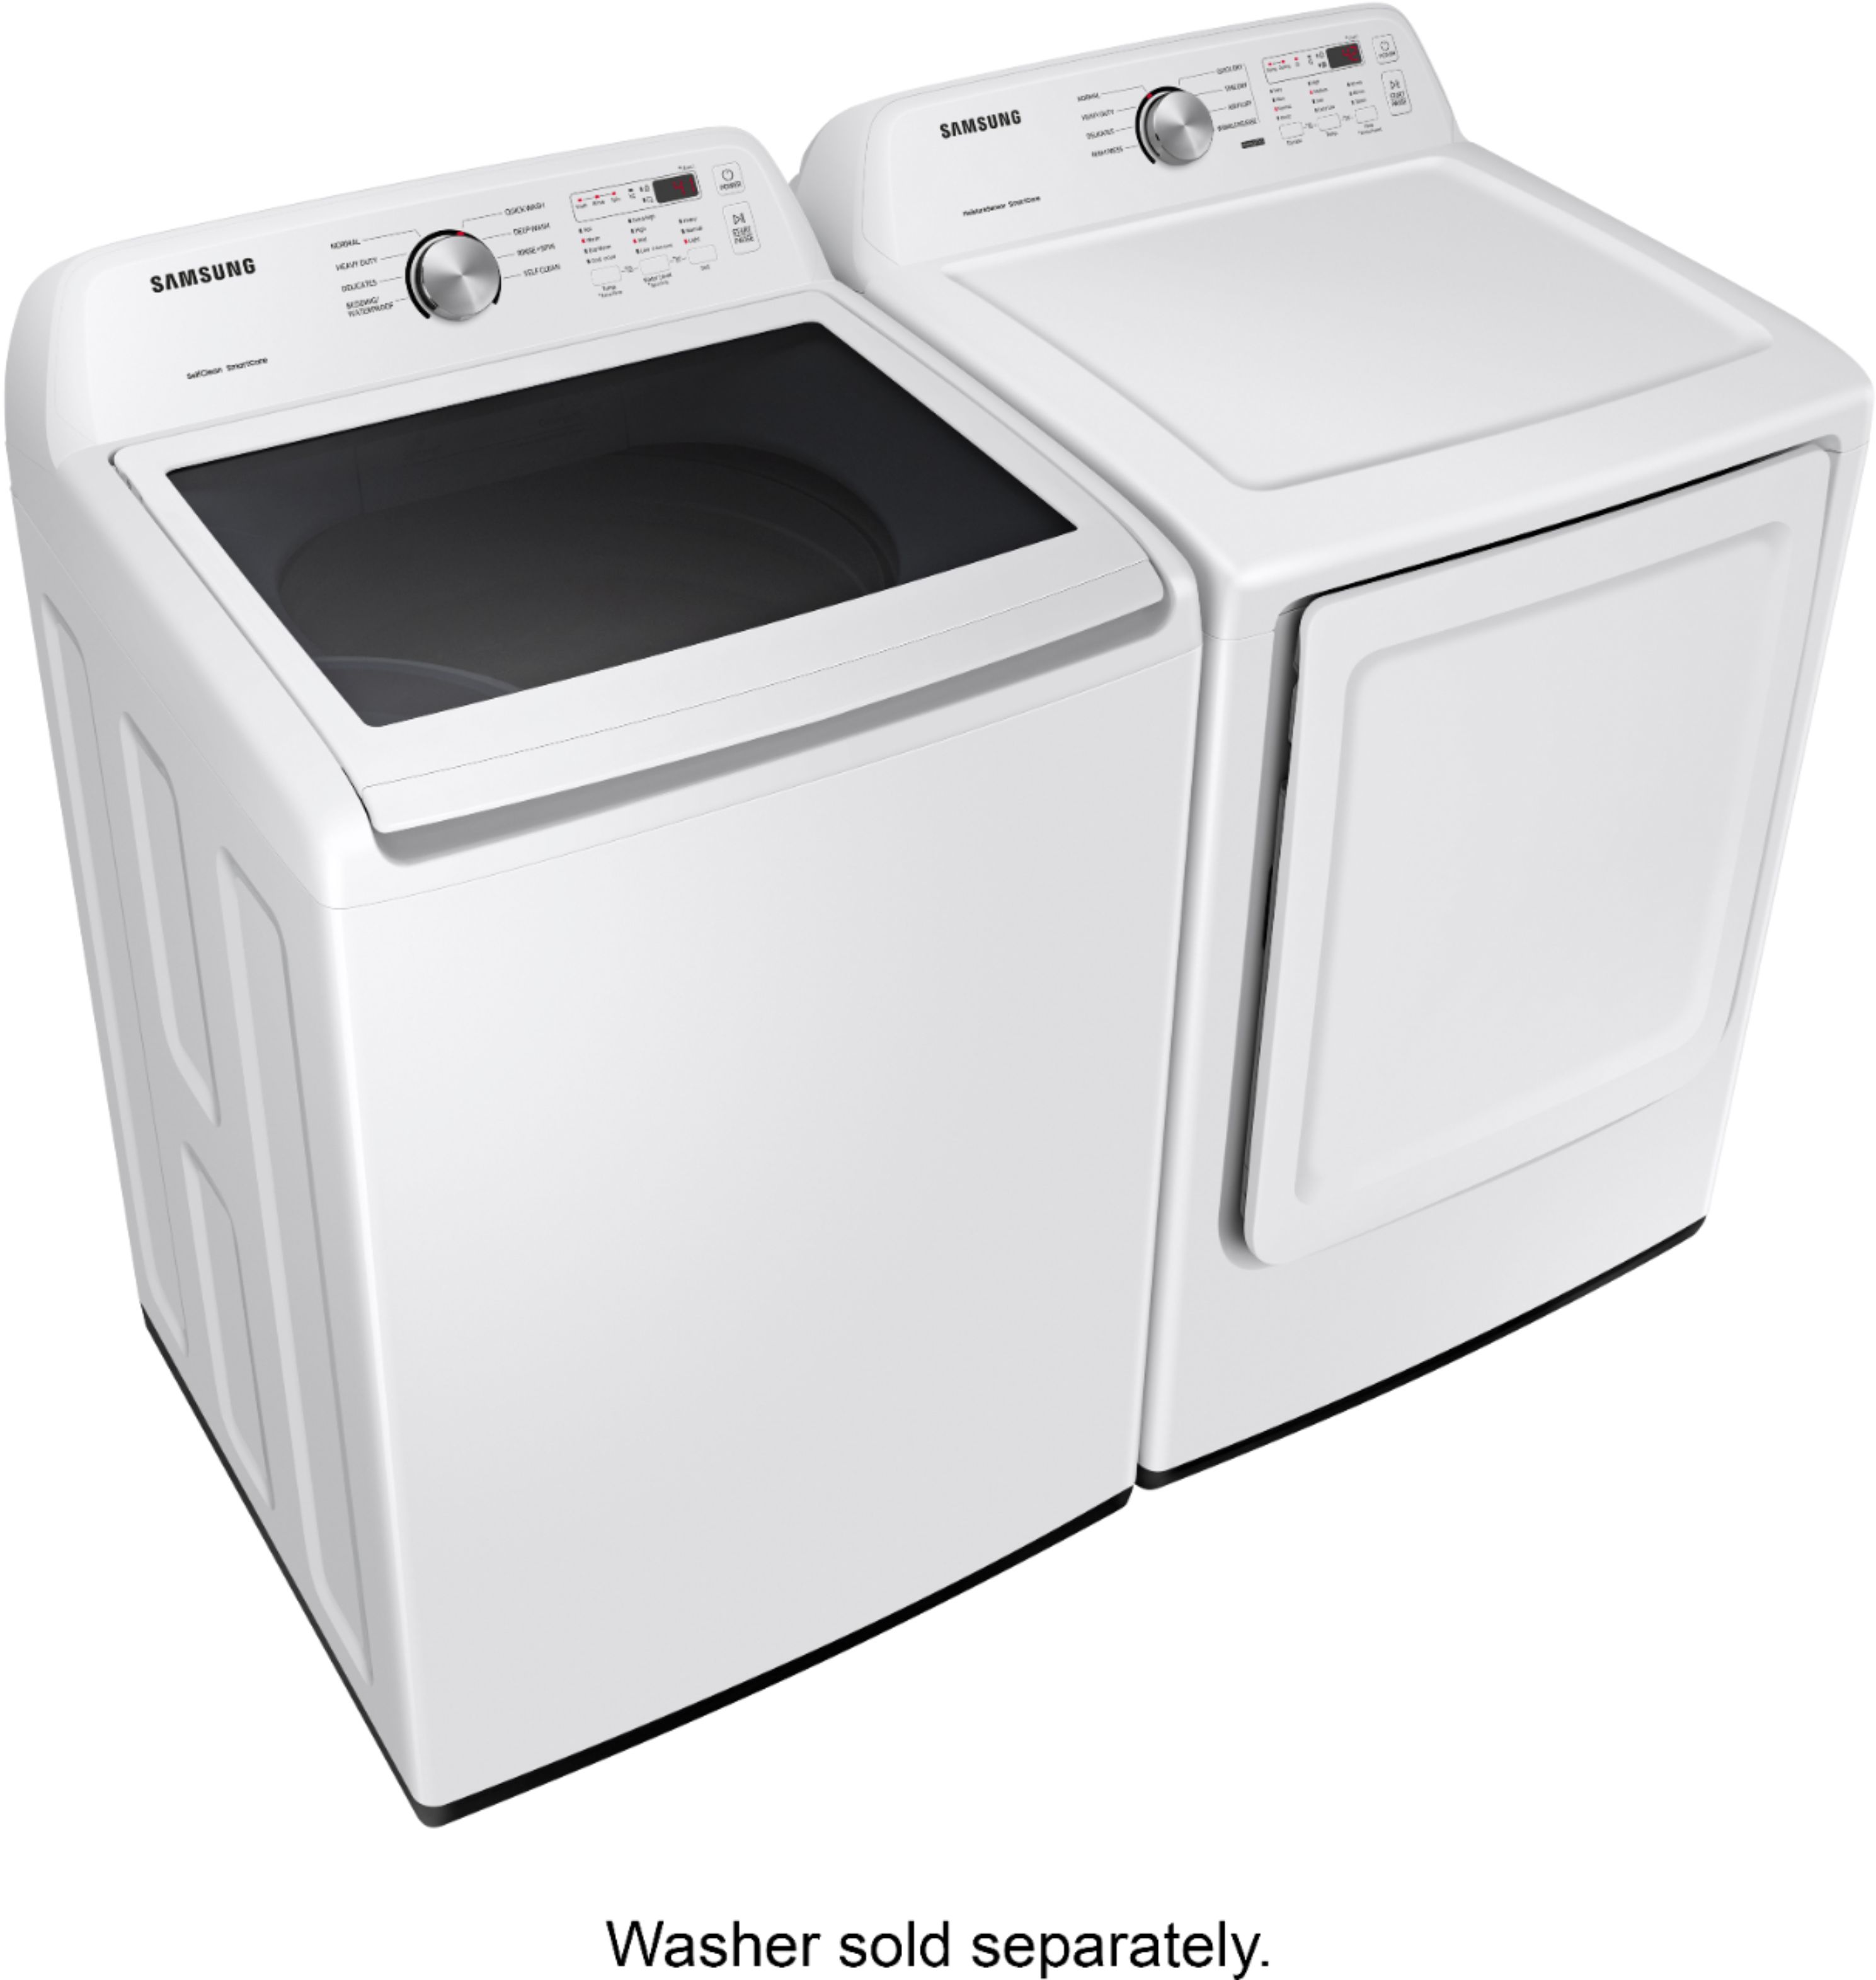 samsung-7-2-cu-ft-electric-dryer-with-8-cycles-and-sensor-dry-white